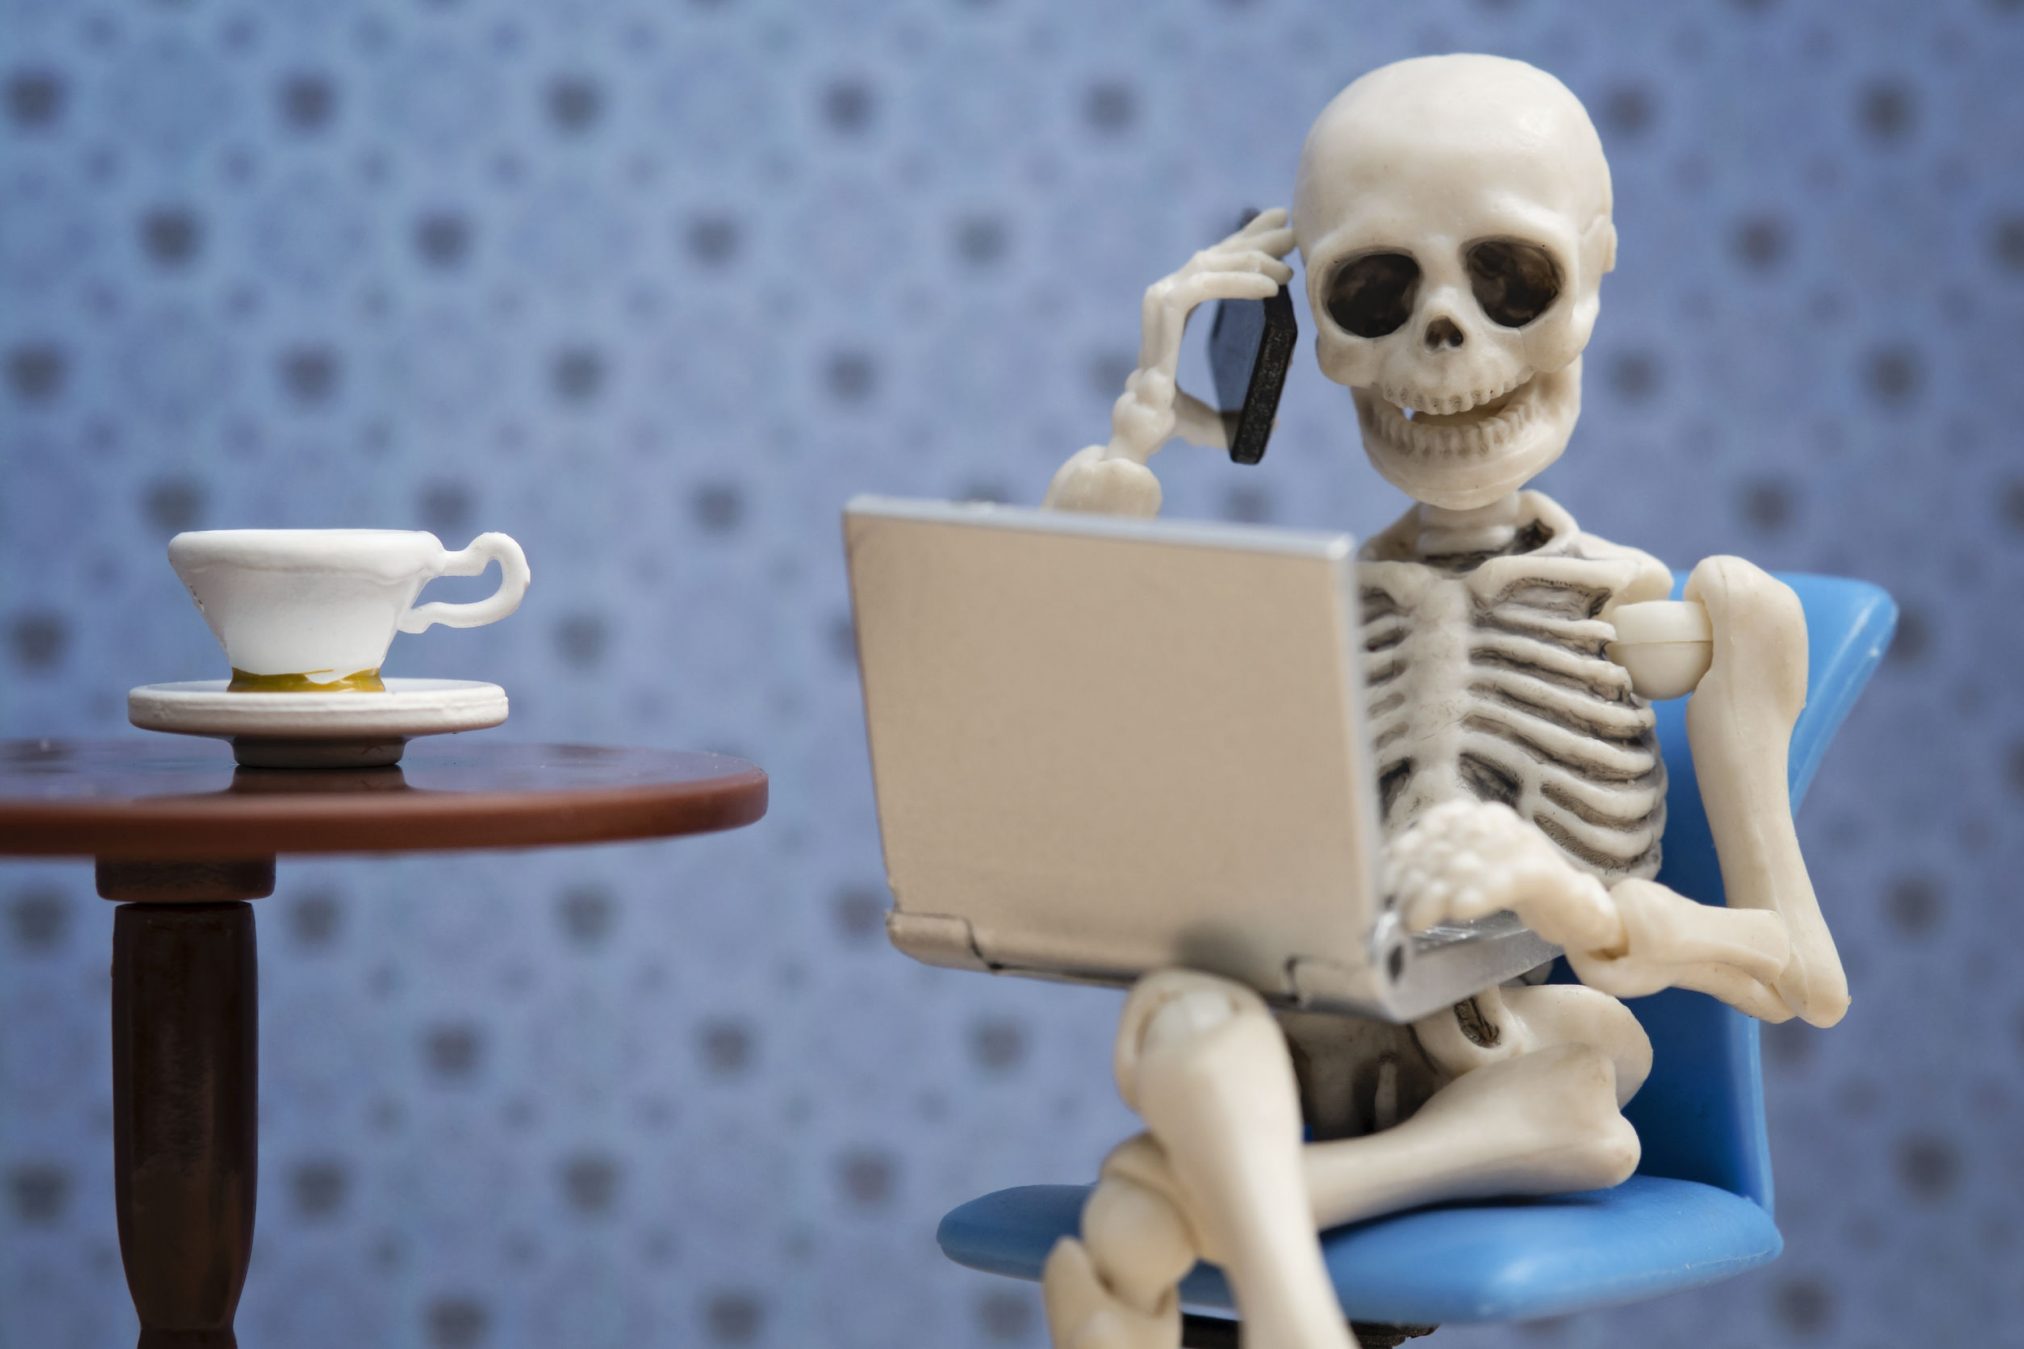 skeleton with laptop and phone